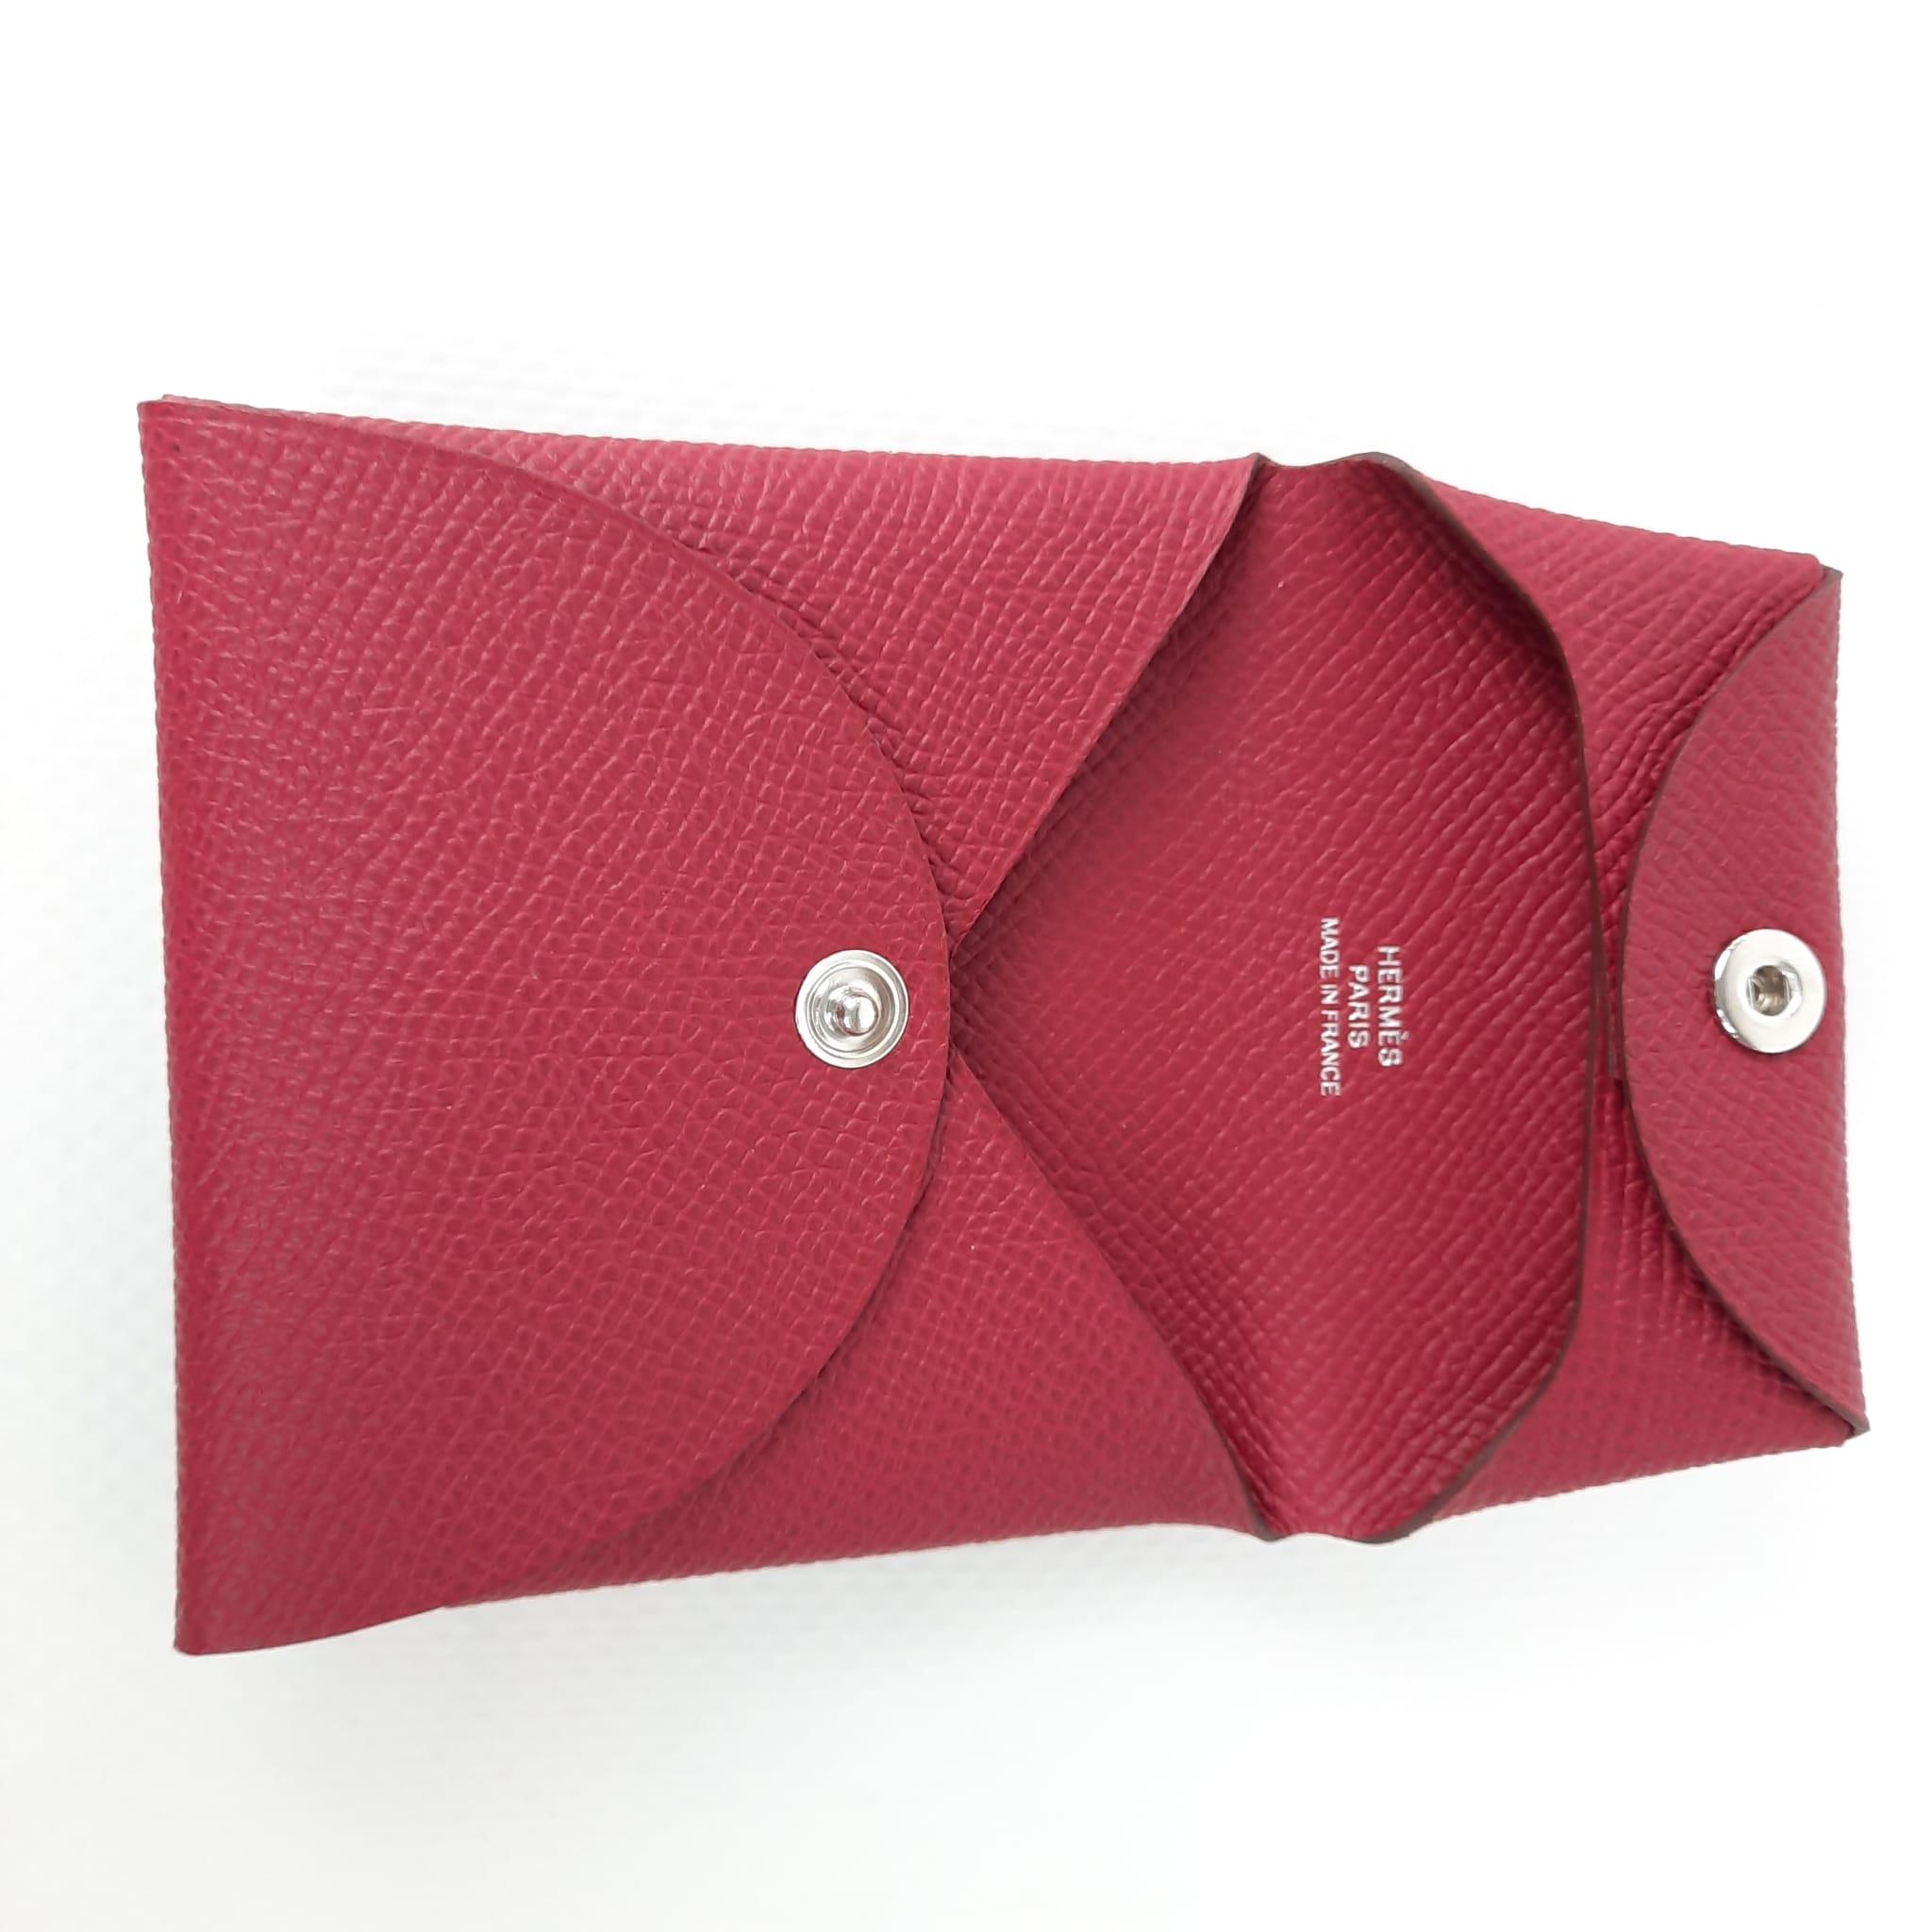 Hermes Rubis Bastia change purse In New Condition For Sale In Nicosia, CY